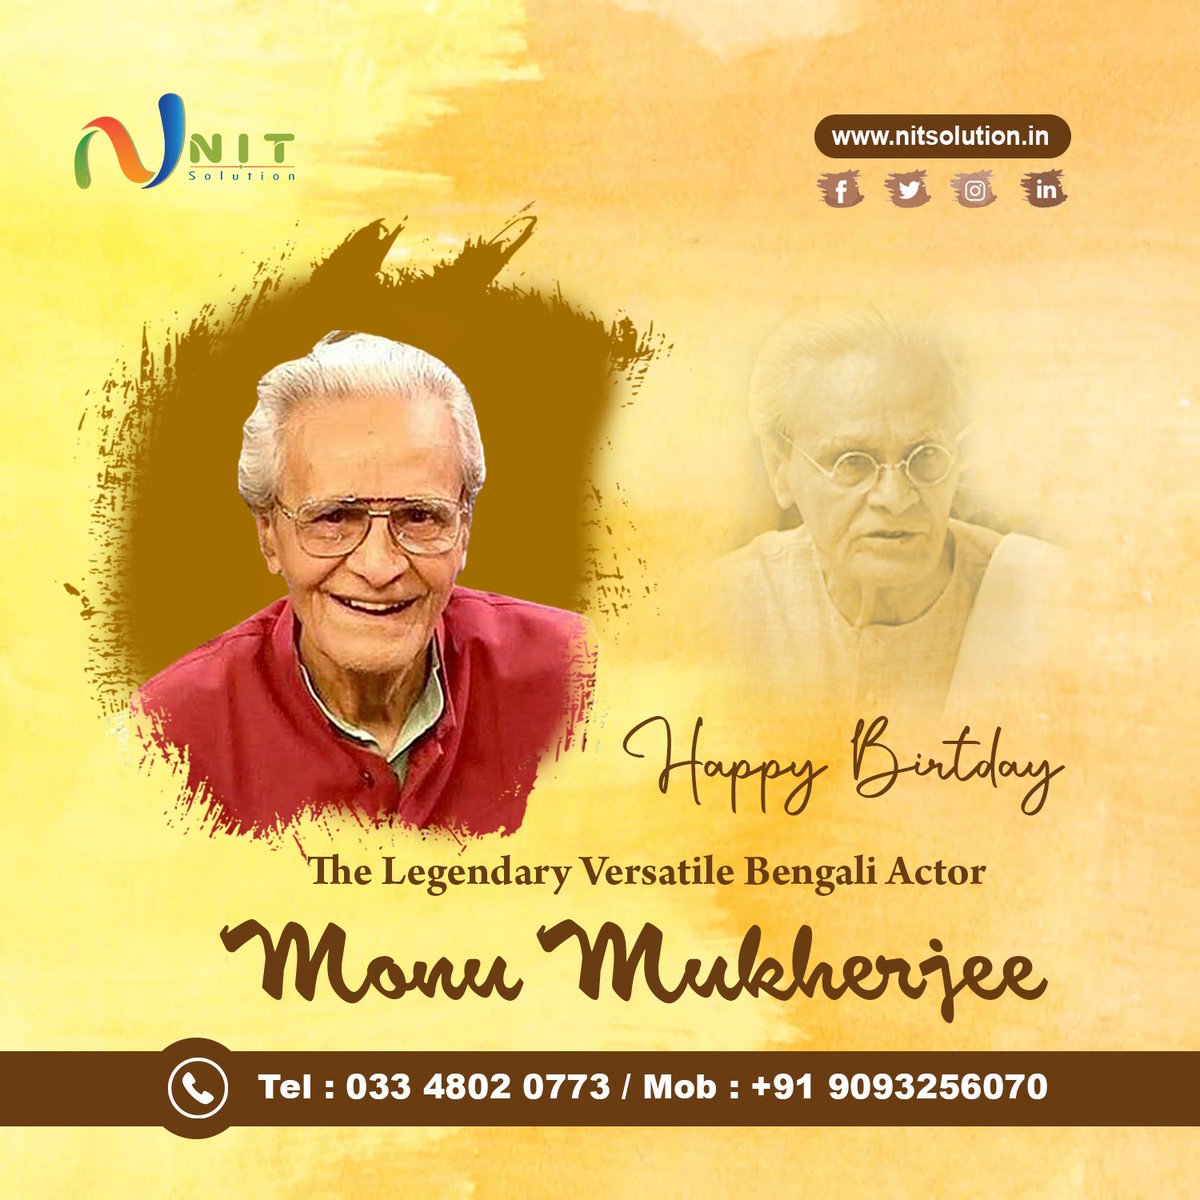 Today, on Monu Mukherjee's birthday, we remember his contributions to the Bengali film industry and his lasting impact on cinema. His performances on the screen will always be remembered, and he will forever be missed by his fans and loved ones.

#bengaliactor #bengalifilm